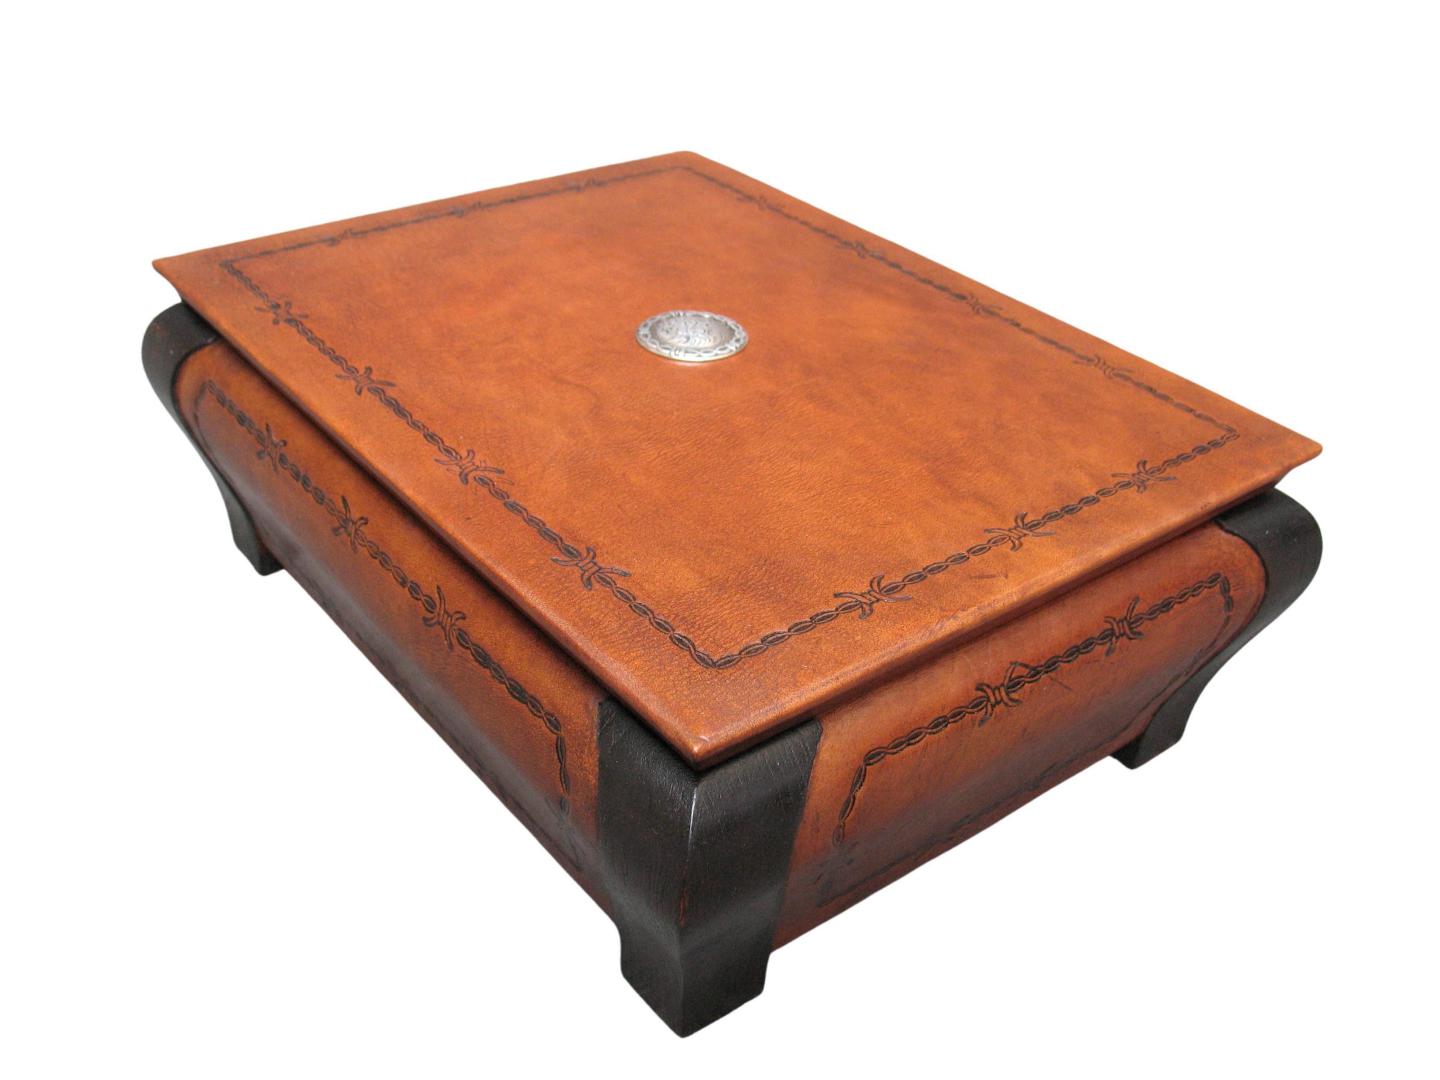 leather box with a concho design on the top and barbed wire on the side